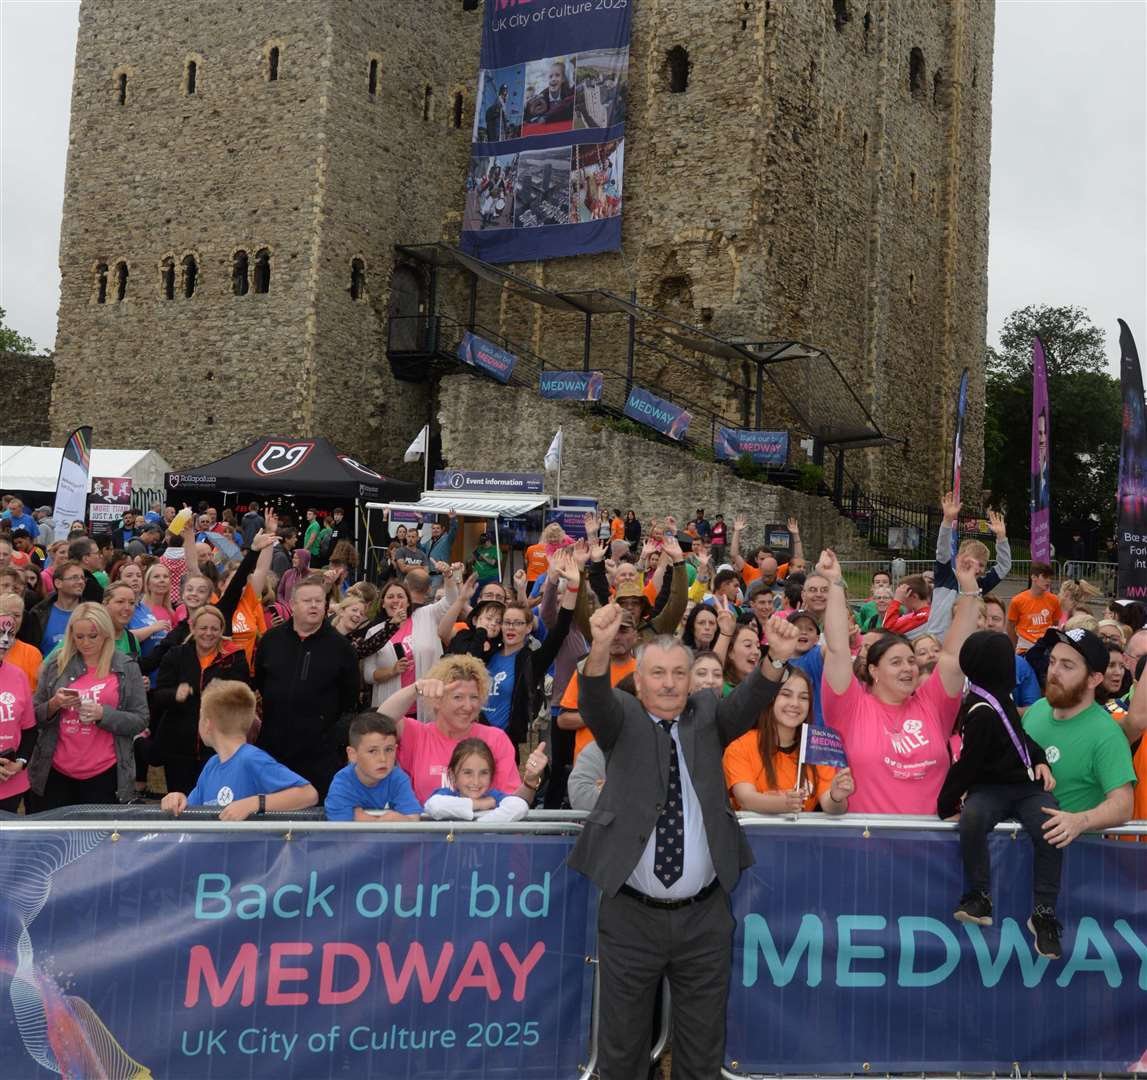 Council leader Cllr Alan Jarrett announces Medway's bid to be the UK City of Culture at the Medway Mile event at Rochester Castle on Friday evening. Picture: Chris Davey. (14049735)